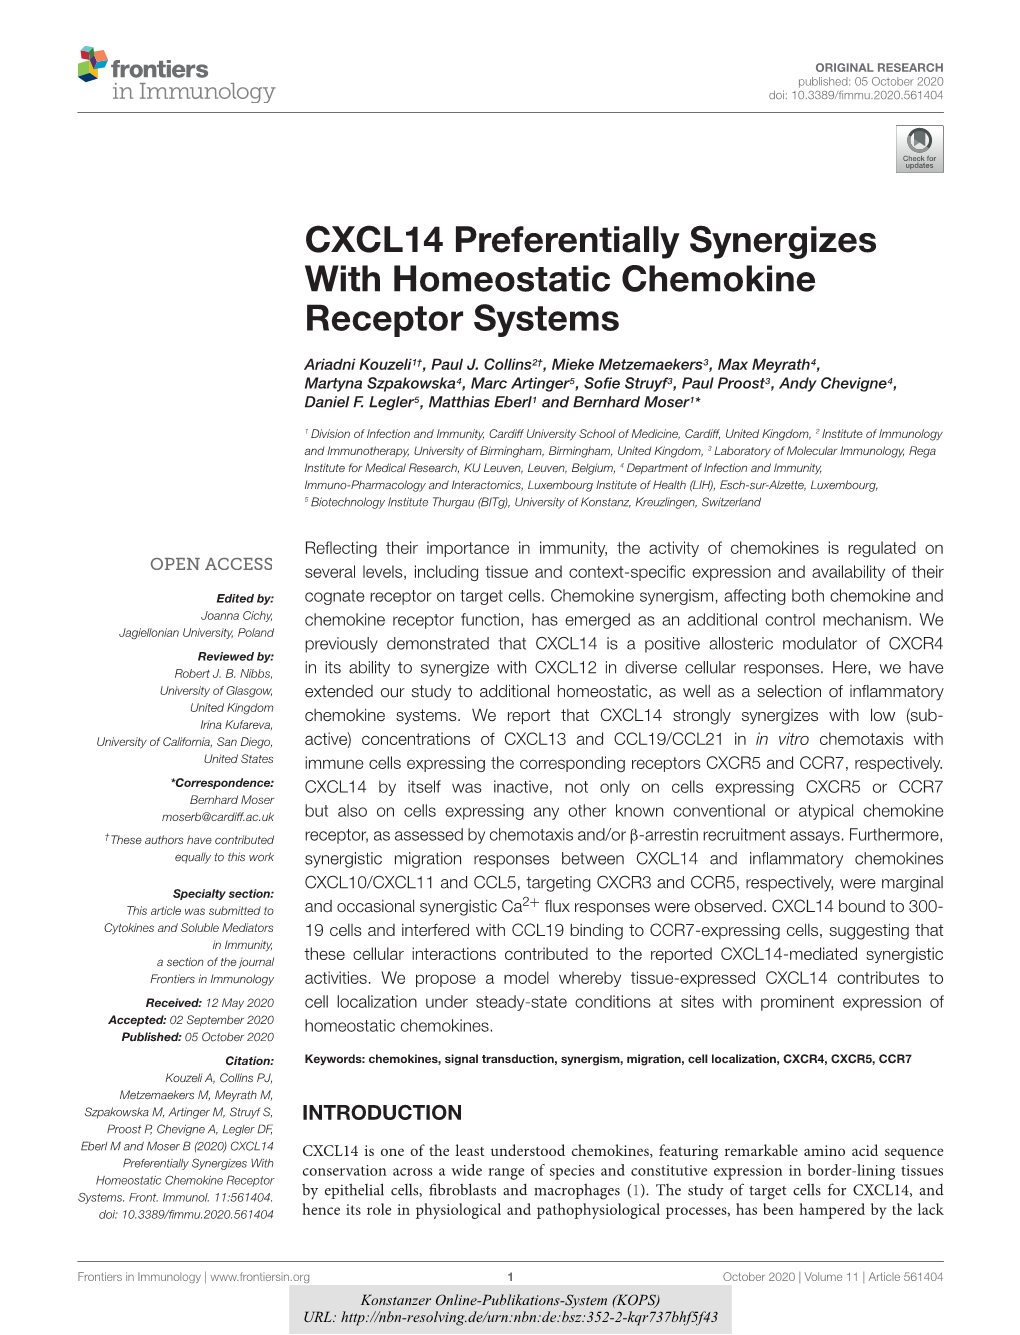 CXCL14 Preferentially Synergizes with Homeostatic Chemokine Receptor Systems